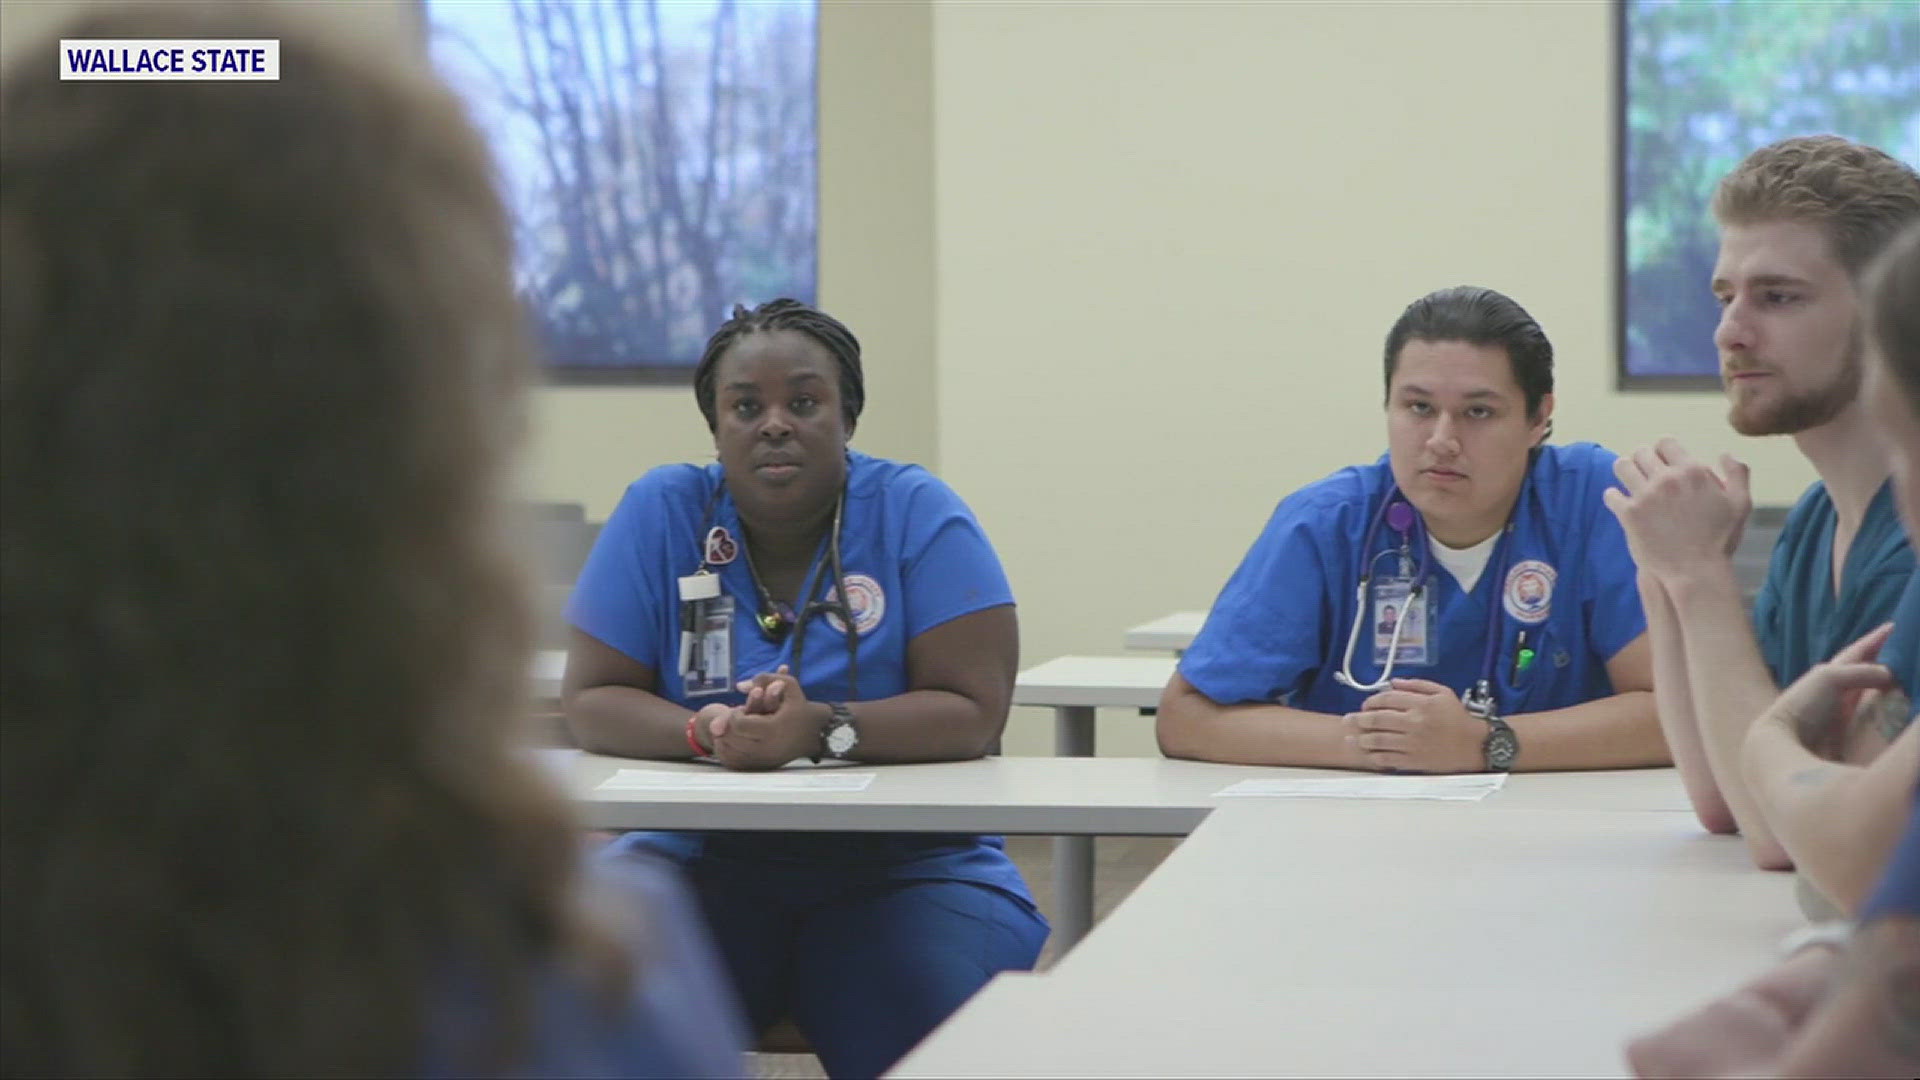 The two colleges will offer an associates and bachelors degree program to help train the next generation of nursing professionals.